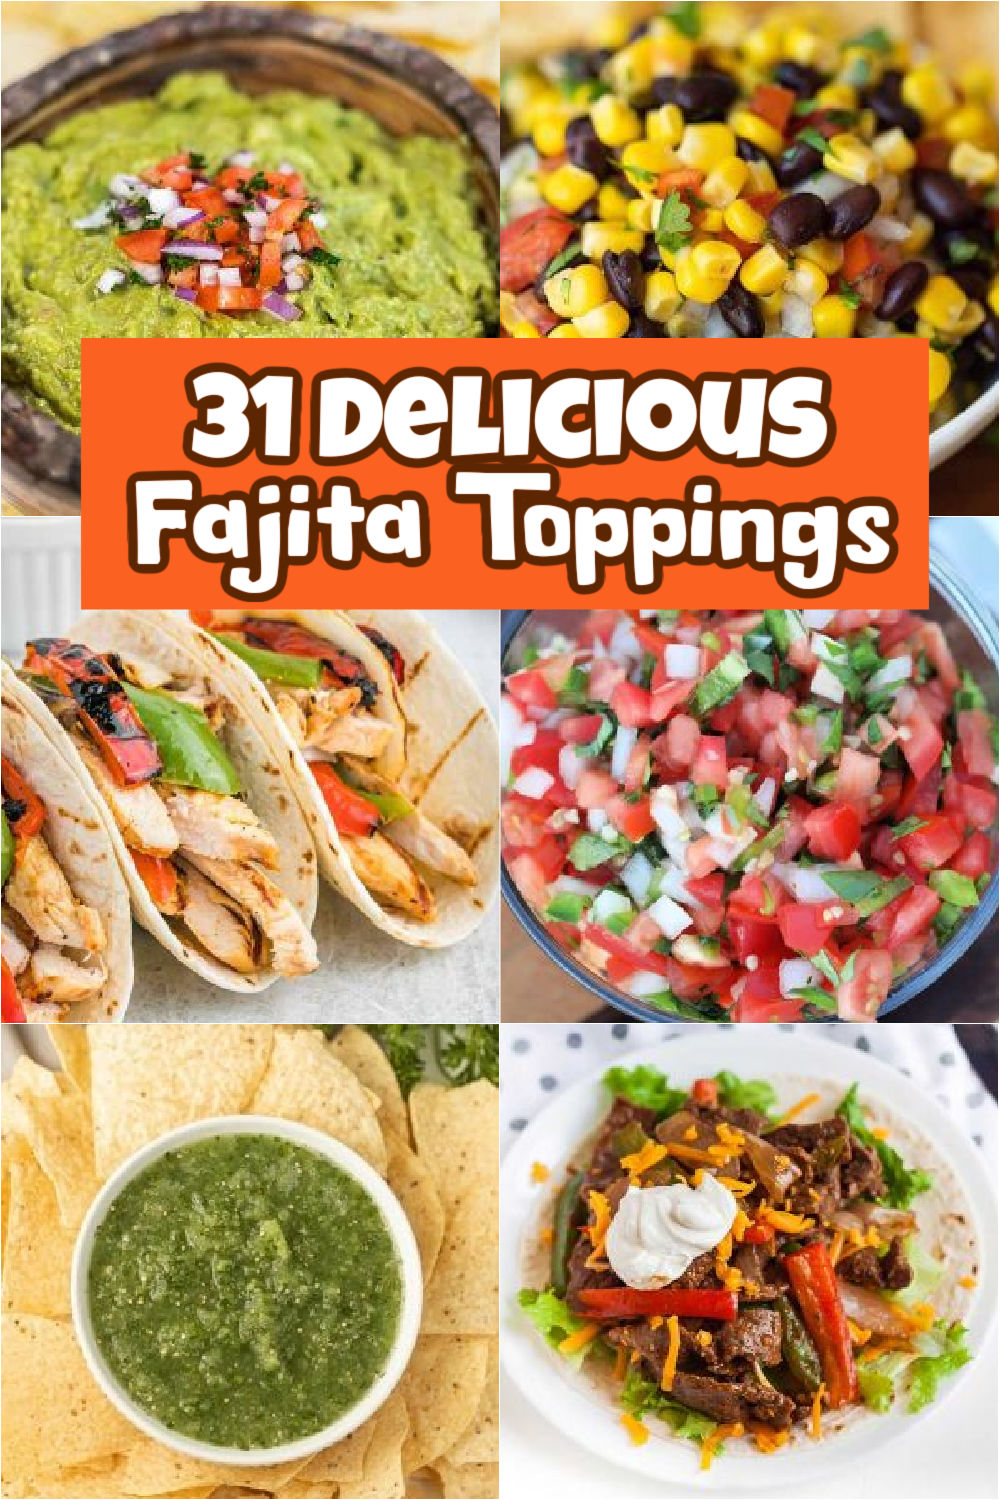 Create the most delicious fajita meal with these fajita toppings that come together easily. We’ve rounded up the 31 best toppings for fajitas for an amazing meal. The best toppings for chicken, steak, stove top fajitas, flat top fajitas, low carb and chicken fajitas stove top. #eatingonadime #fajitatoppings 